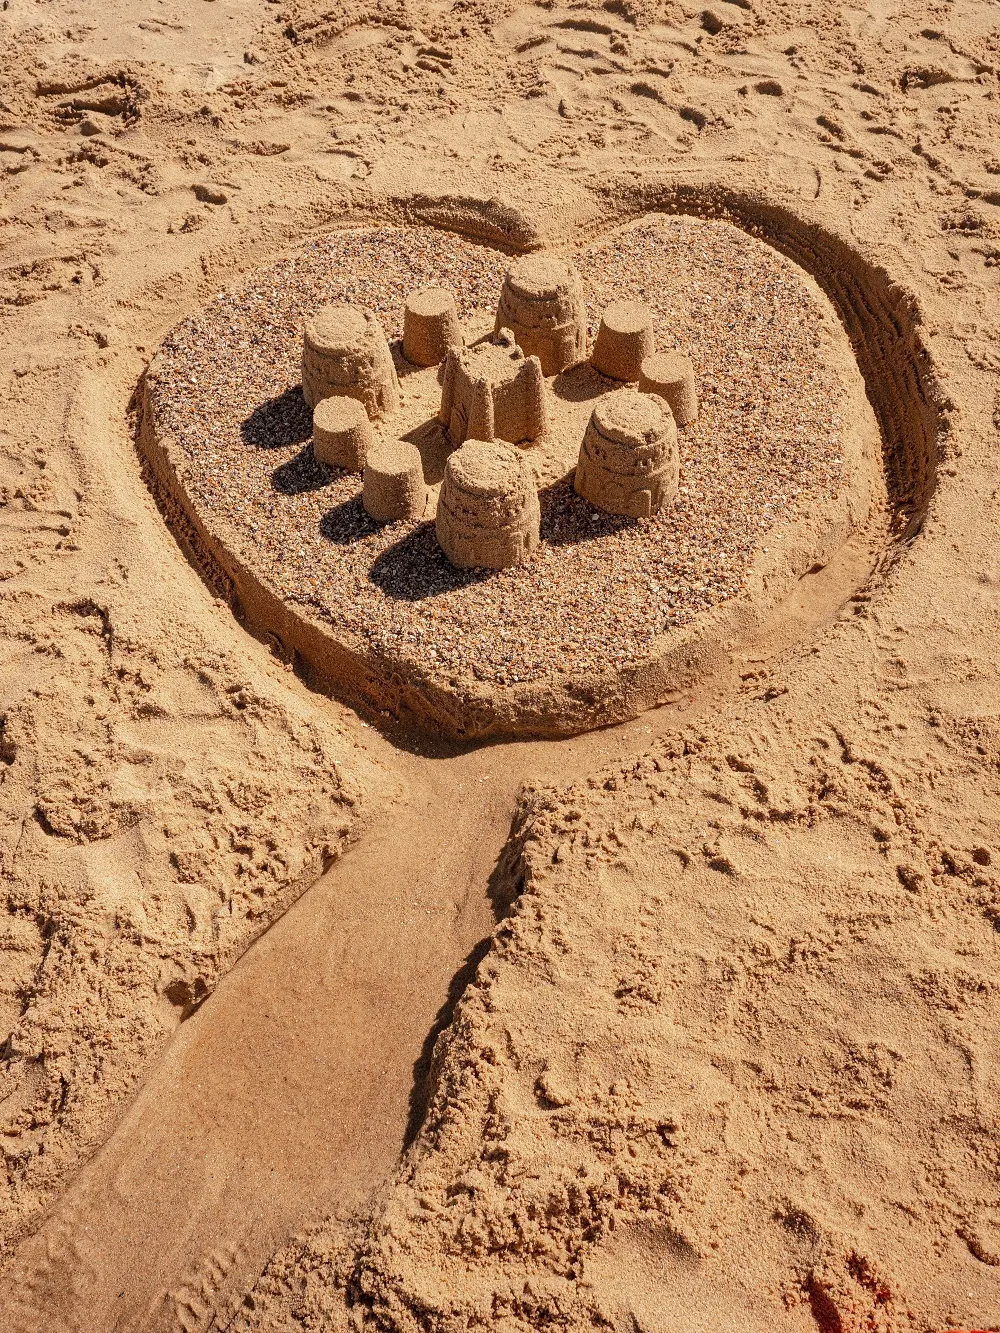 Sandcastle Competition - MFF2022